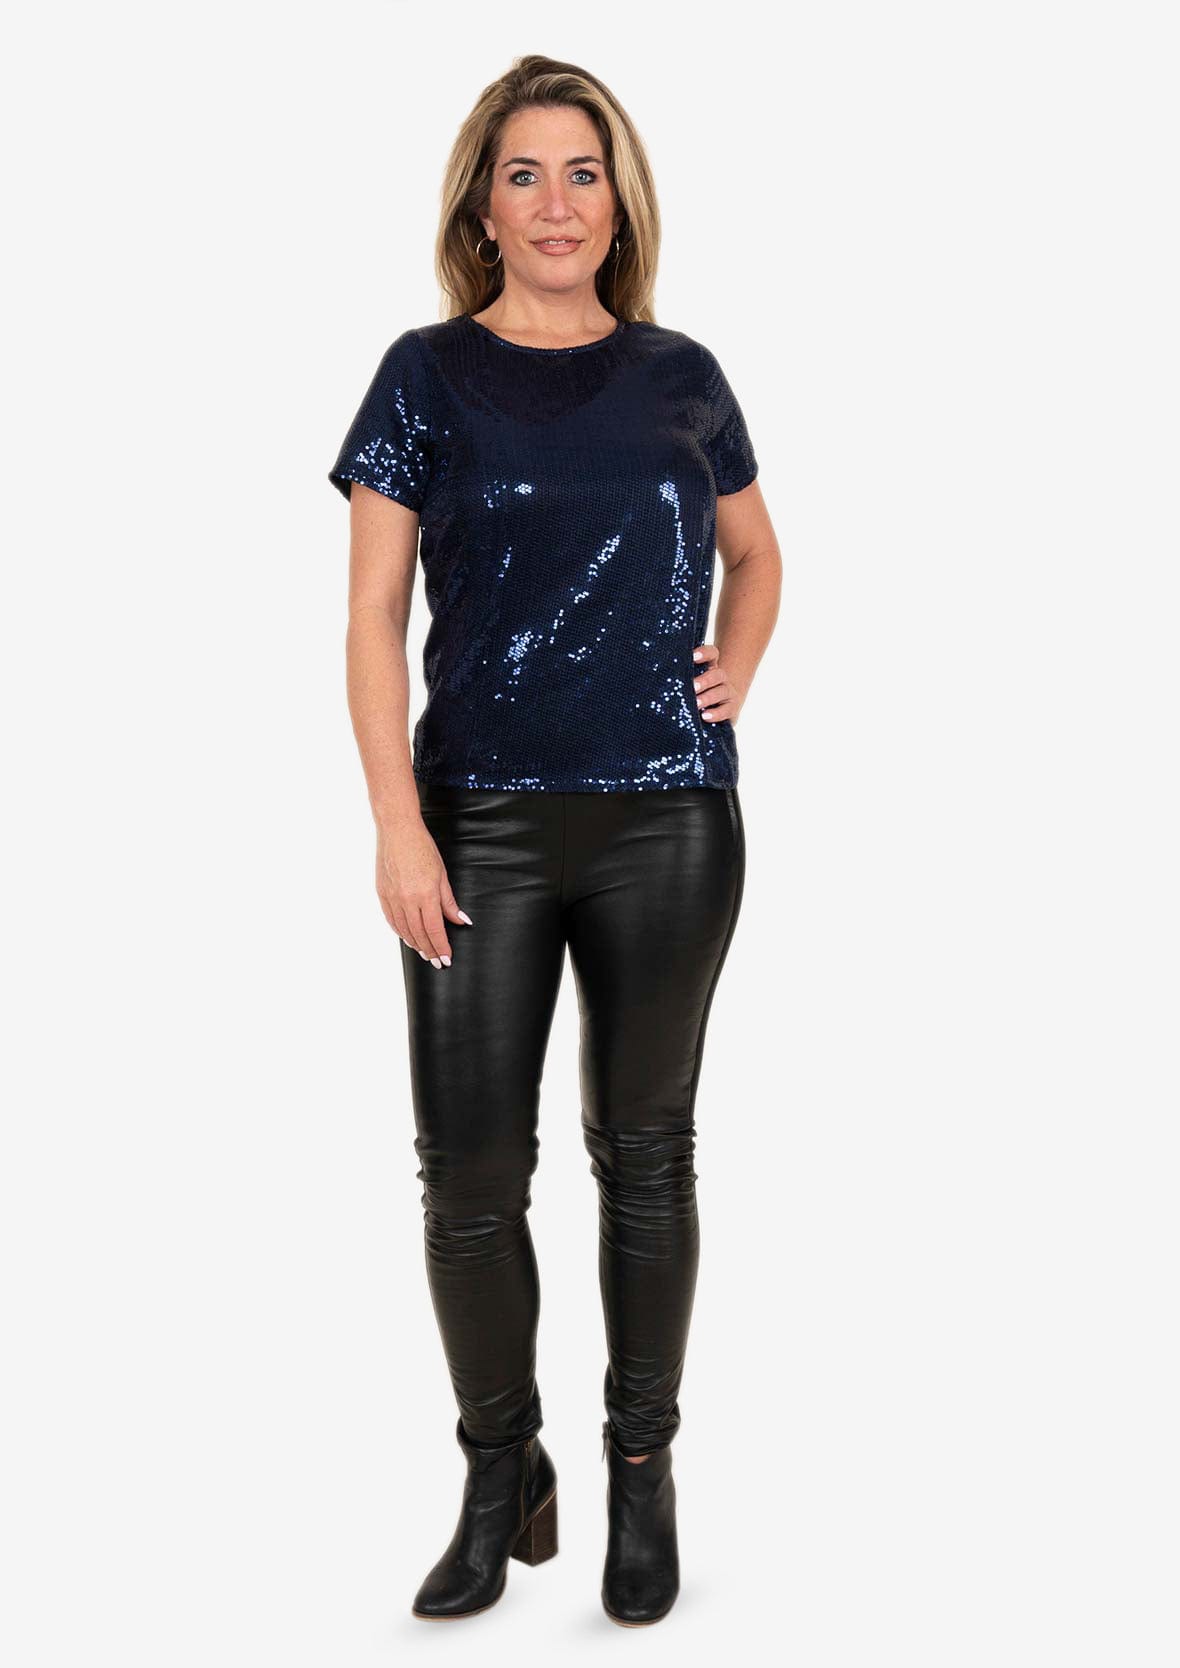 lady wearing sequin classic crew neck navy blue top #color_Navy Blue Sequin